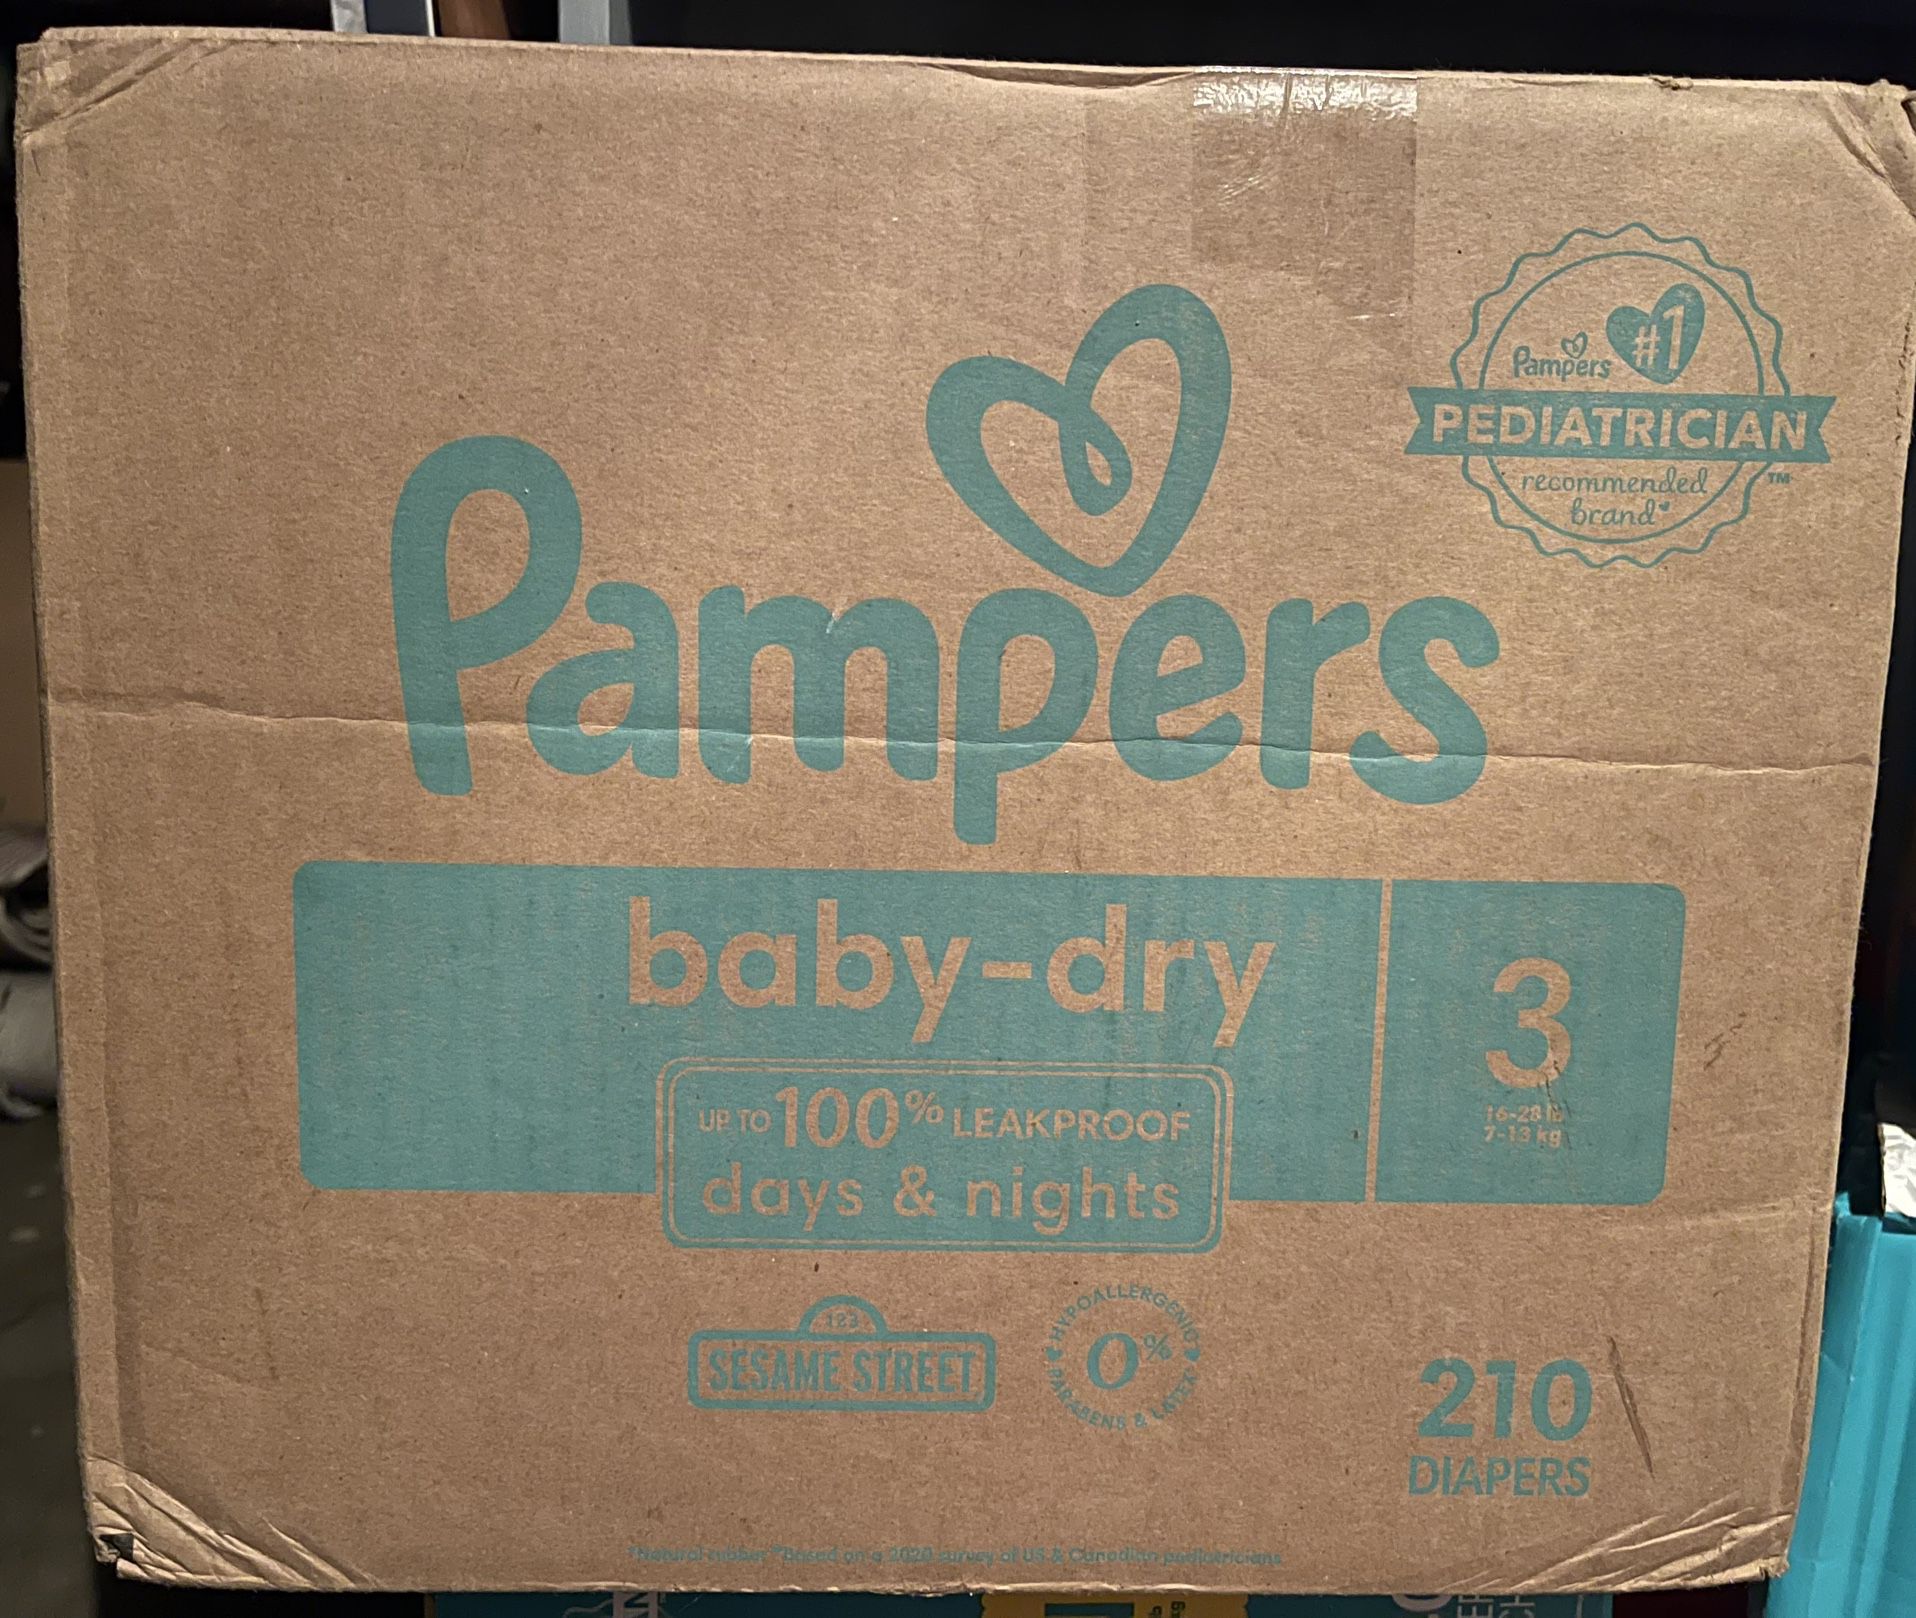 Pampers Baby Dry Size 3 (210 Diapers) 